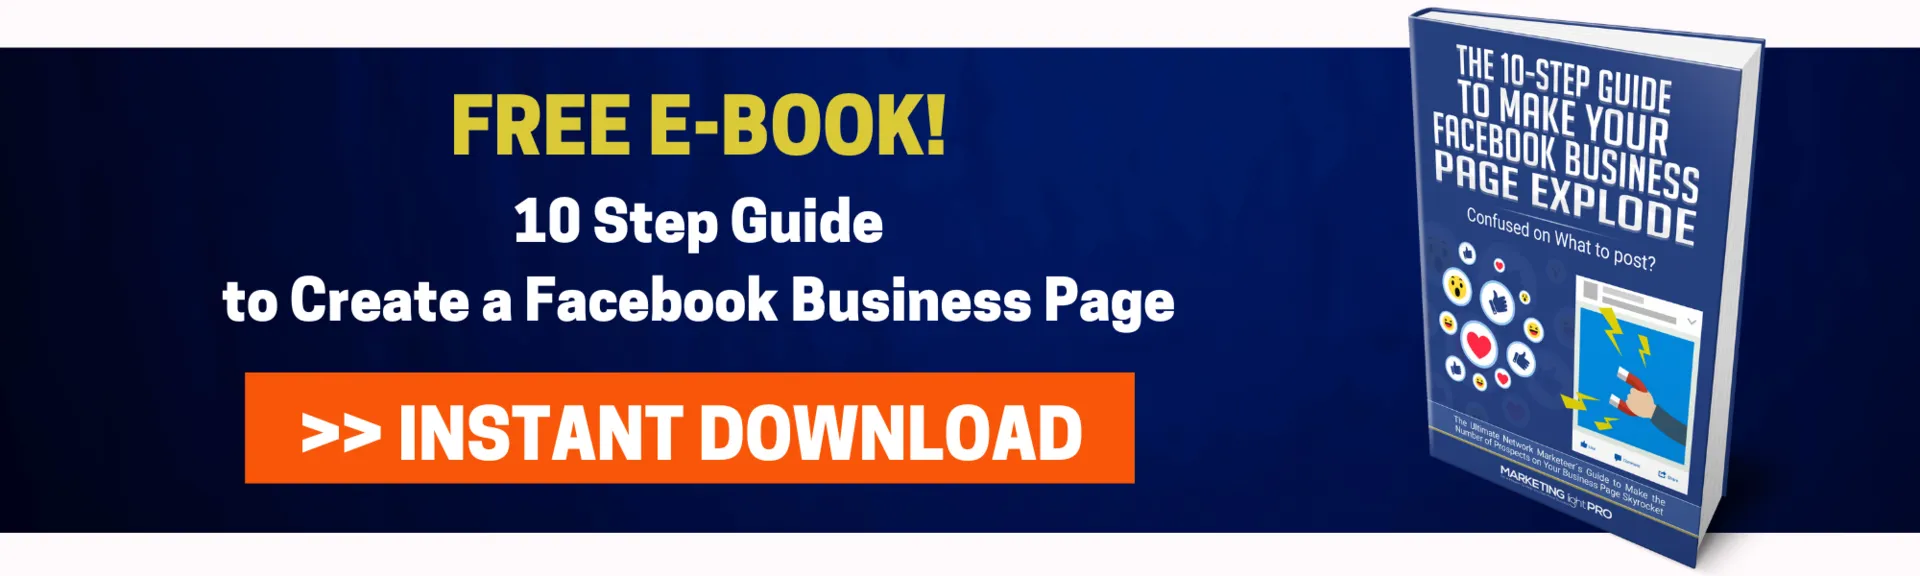 How to make your Facebook page explode